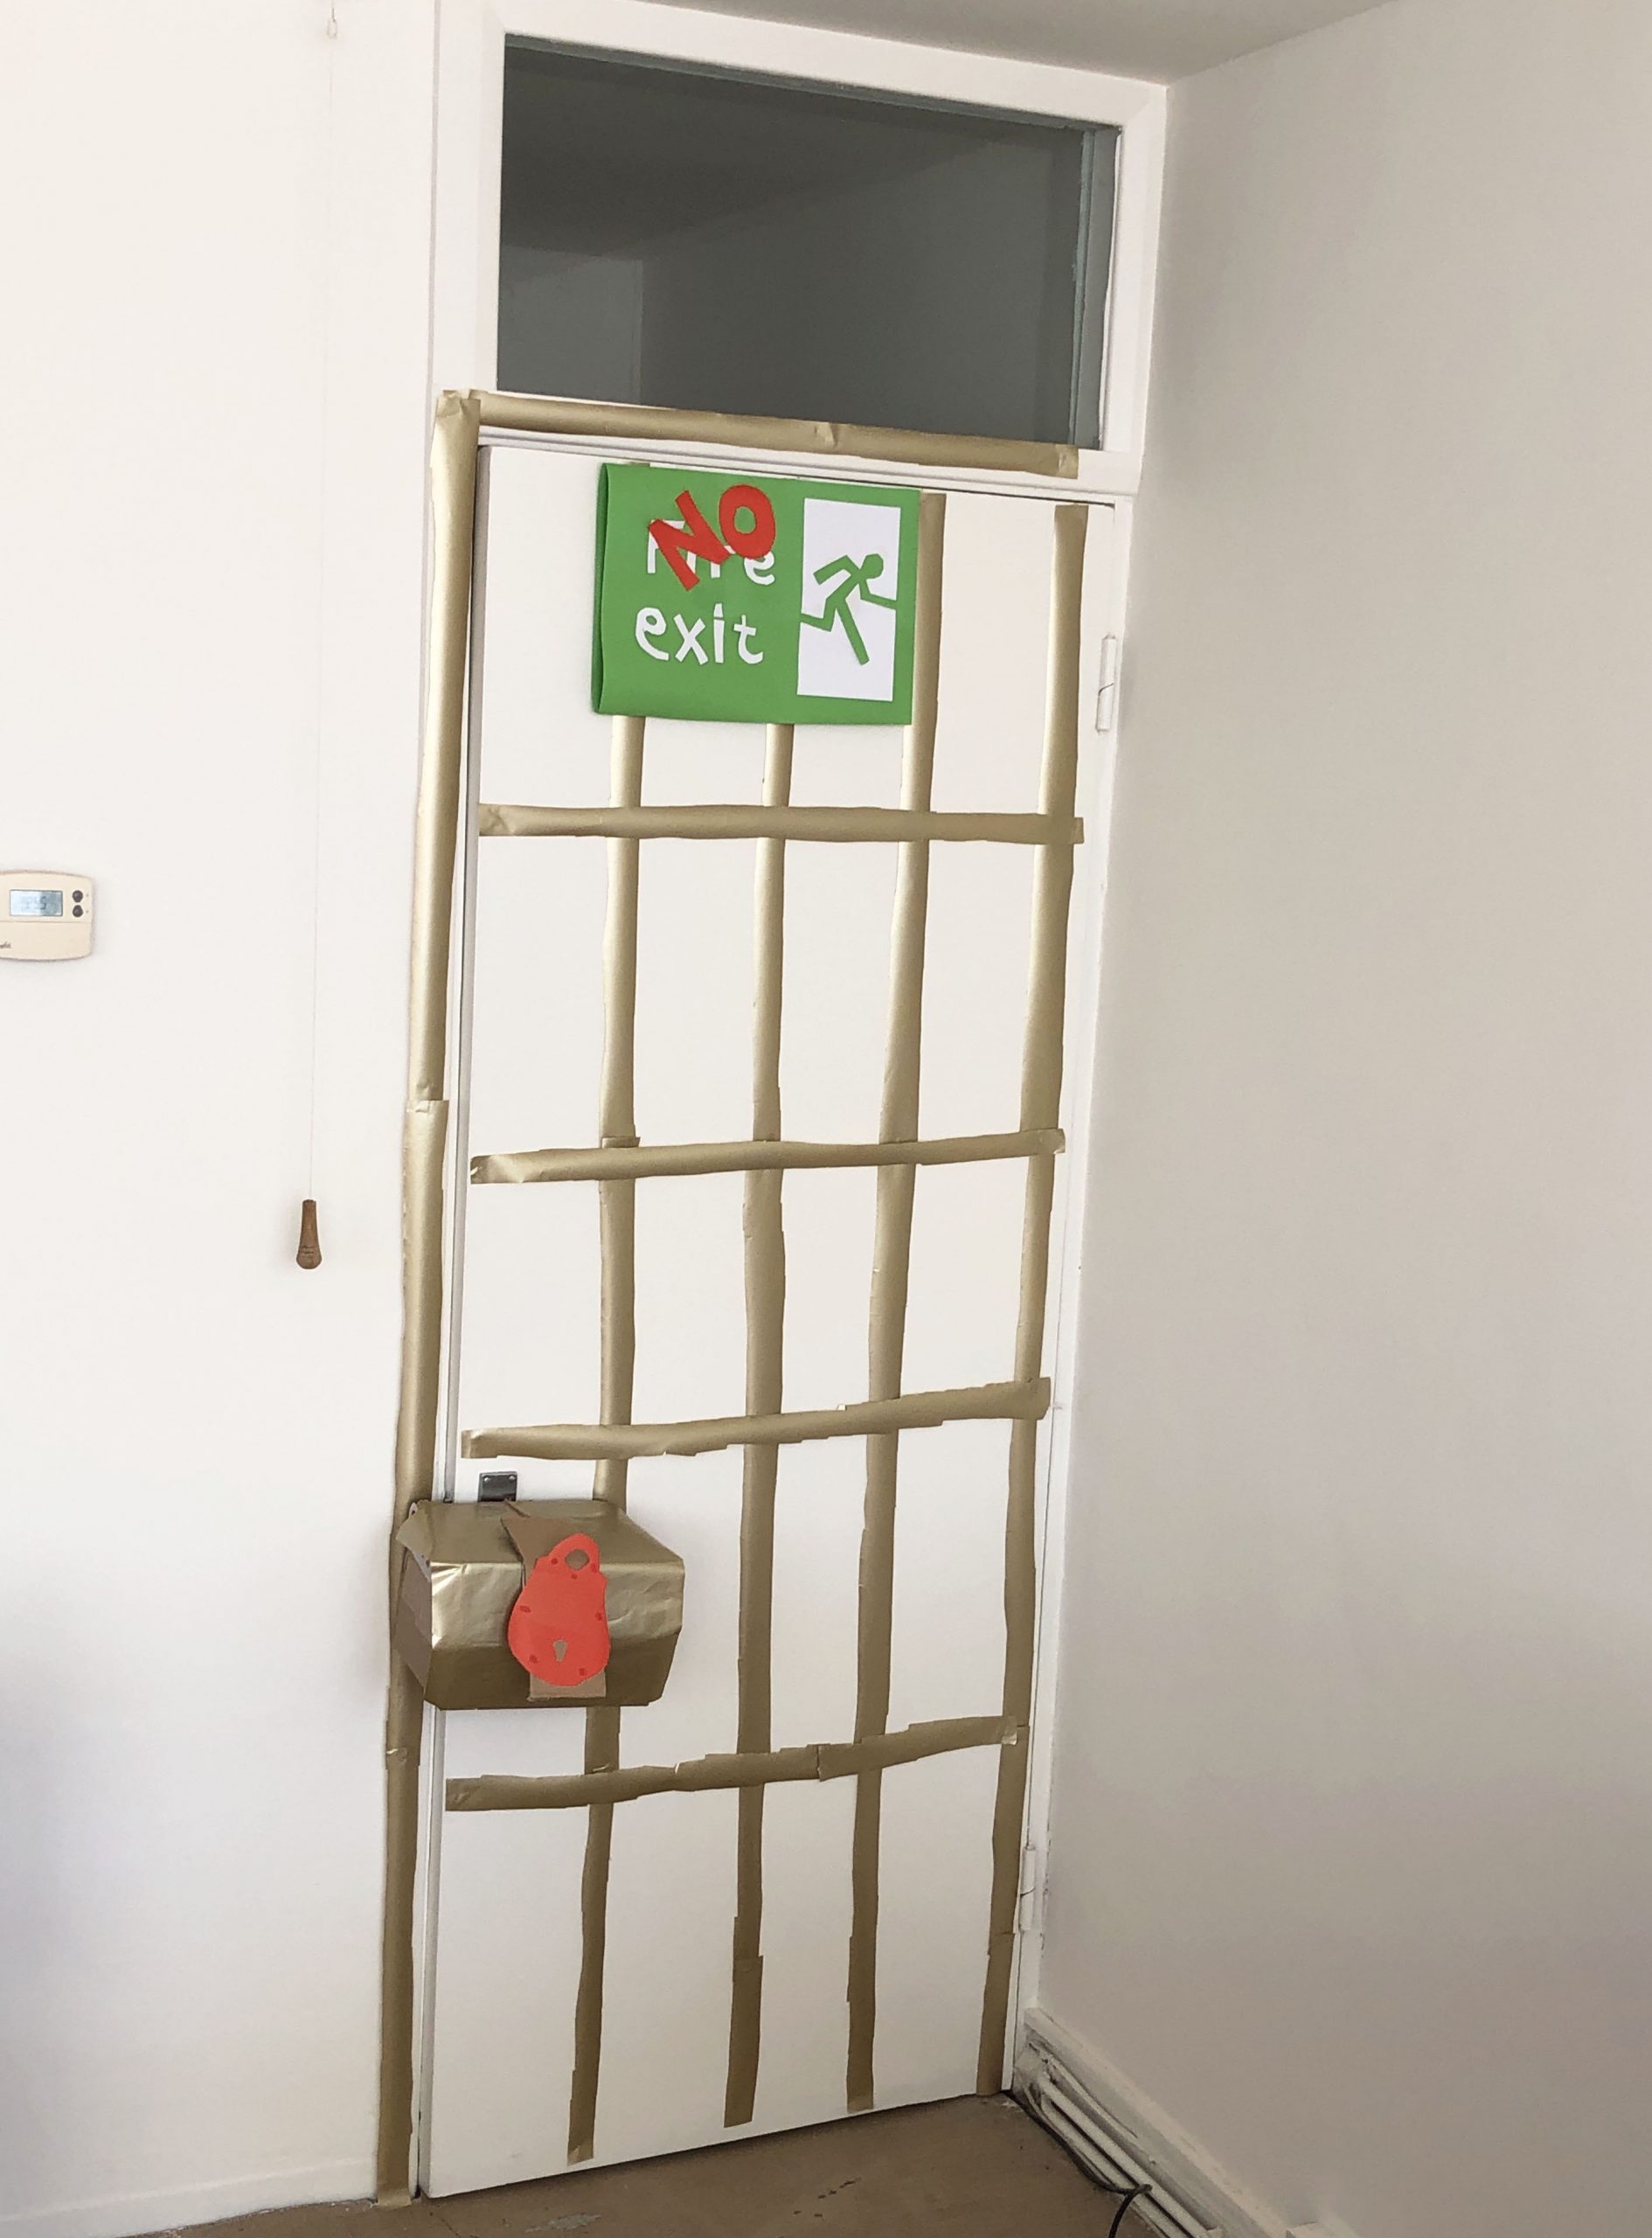 A barred and padlocked door. With a standard green Emergency Exit sign overlaid with a big red NO EXIT sign